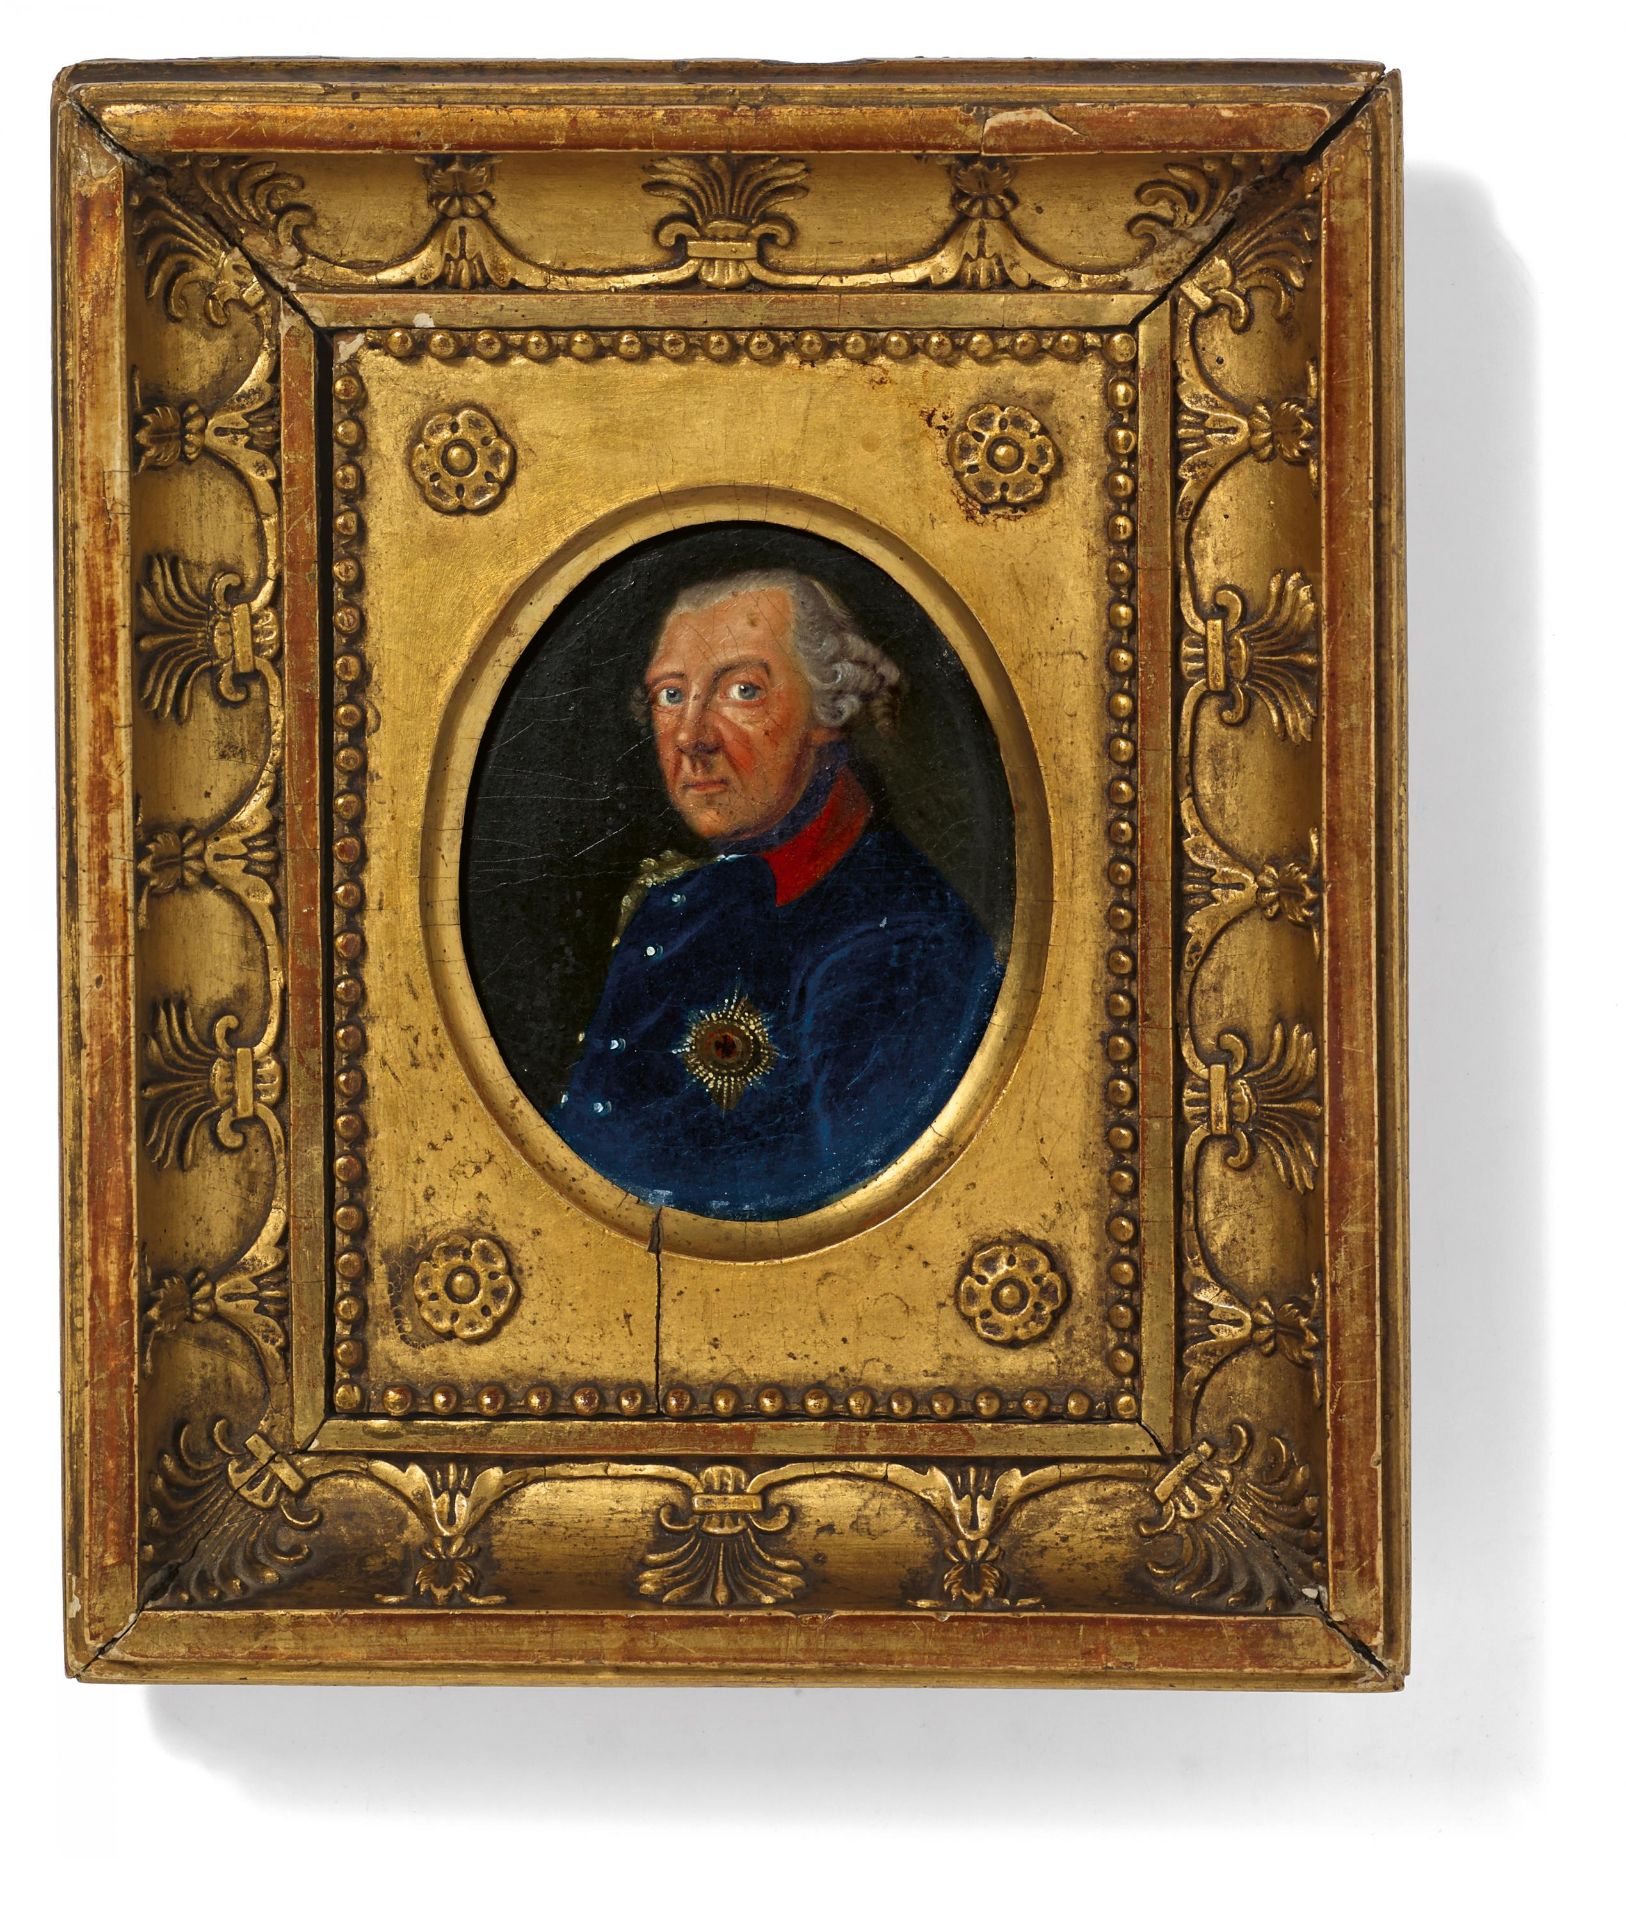 PRUSSIAN COURT PAINTER18. Jh.Title: Miniature Portrait of Frederick the Great with Victory Wreath.